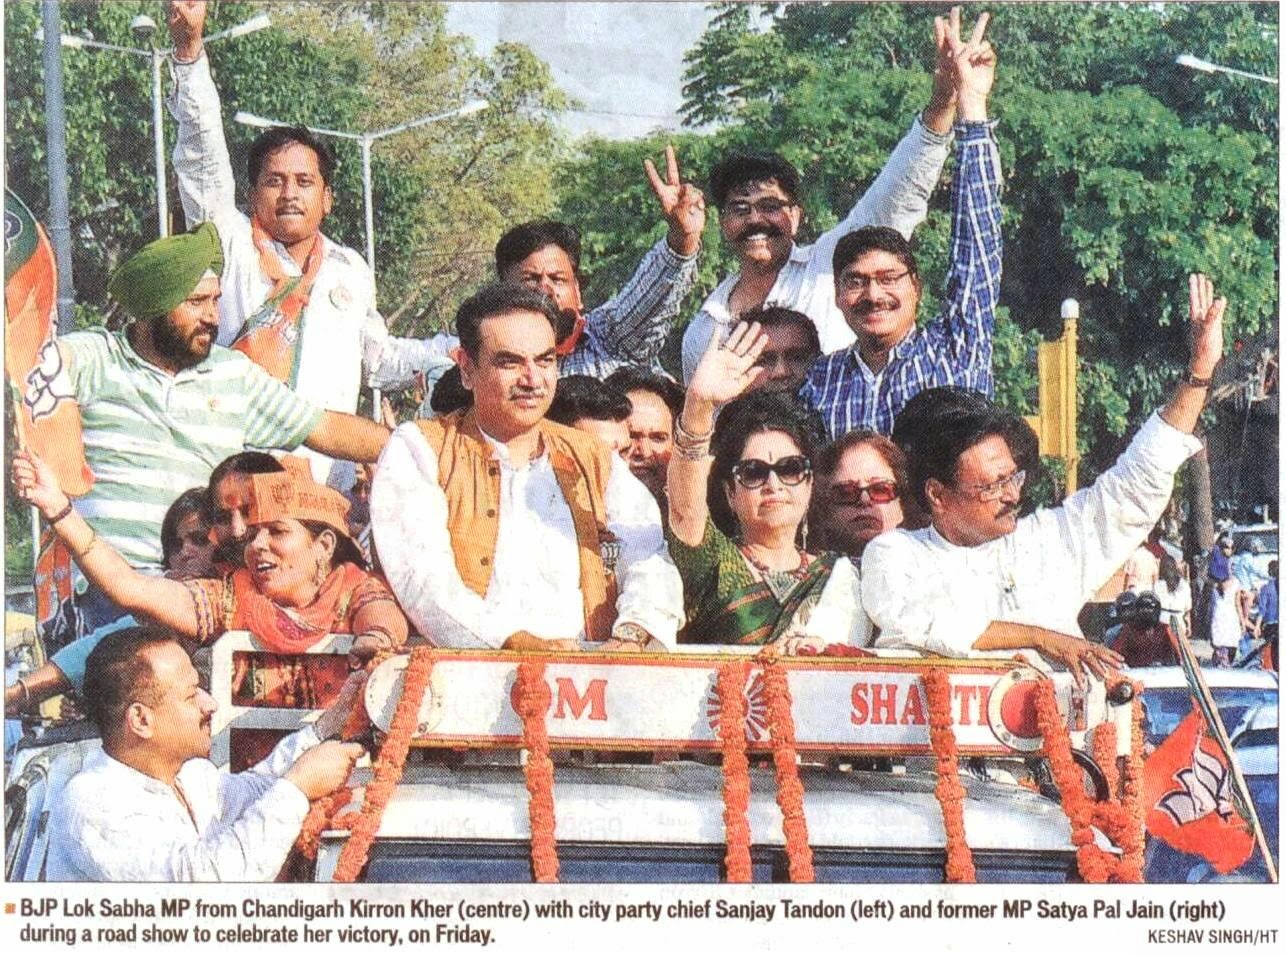 BJP Lok Sabha MP from Chandigarh Kirron Kher with former MP Satya Pal Jain during a road show to celebrate her victory on Friday